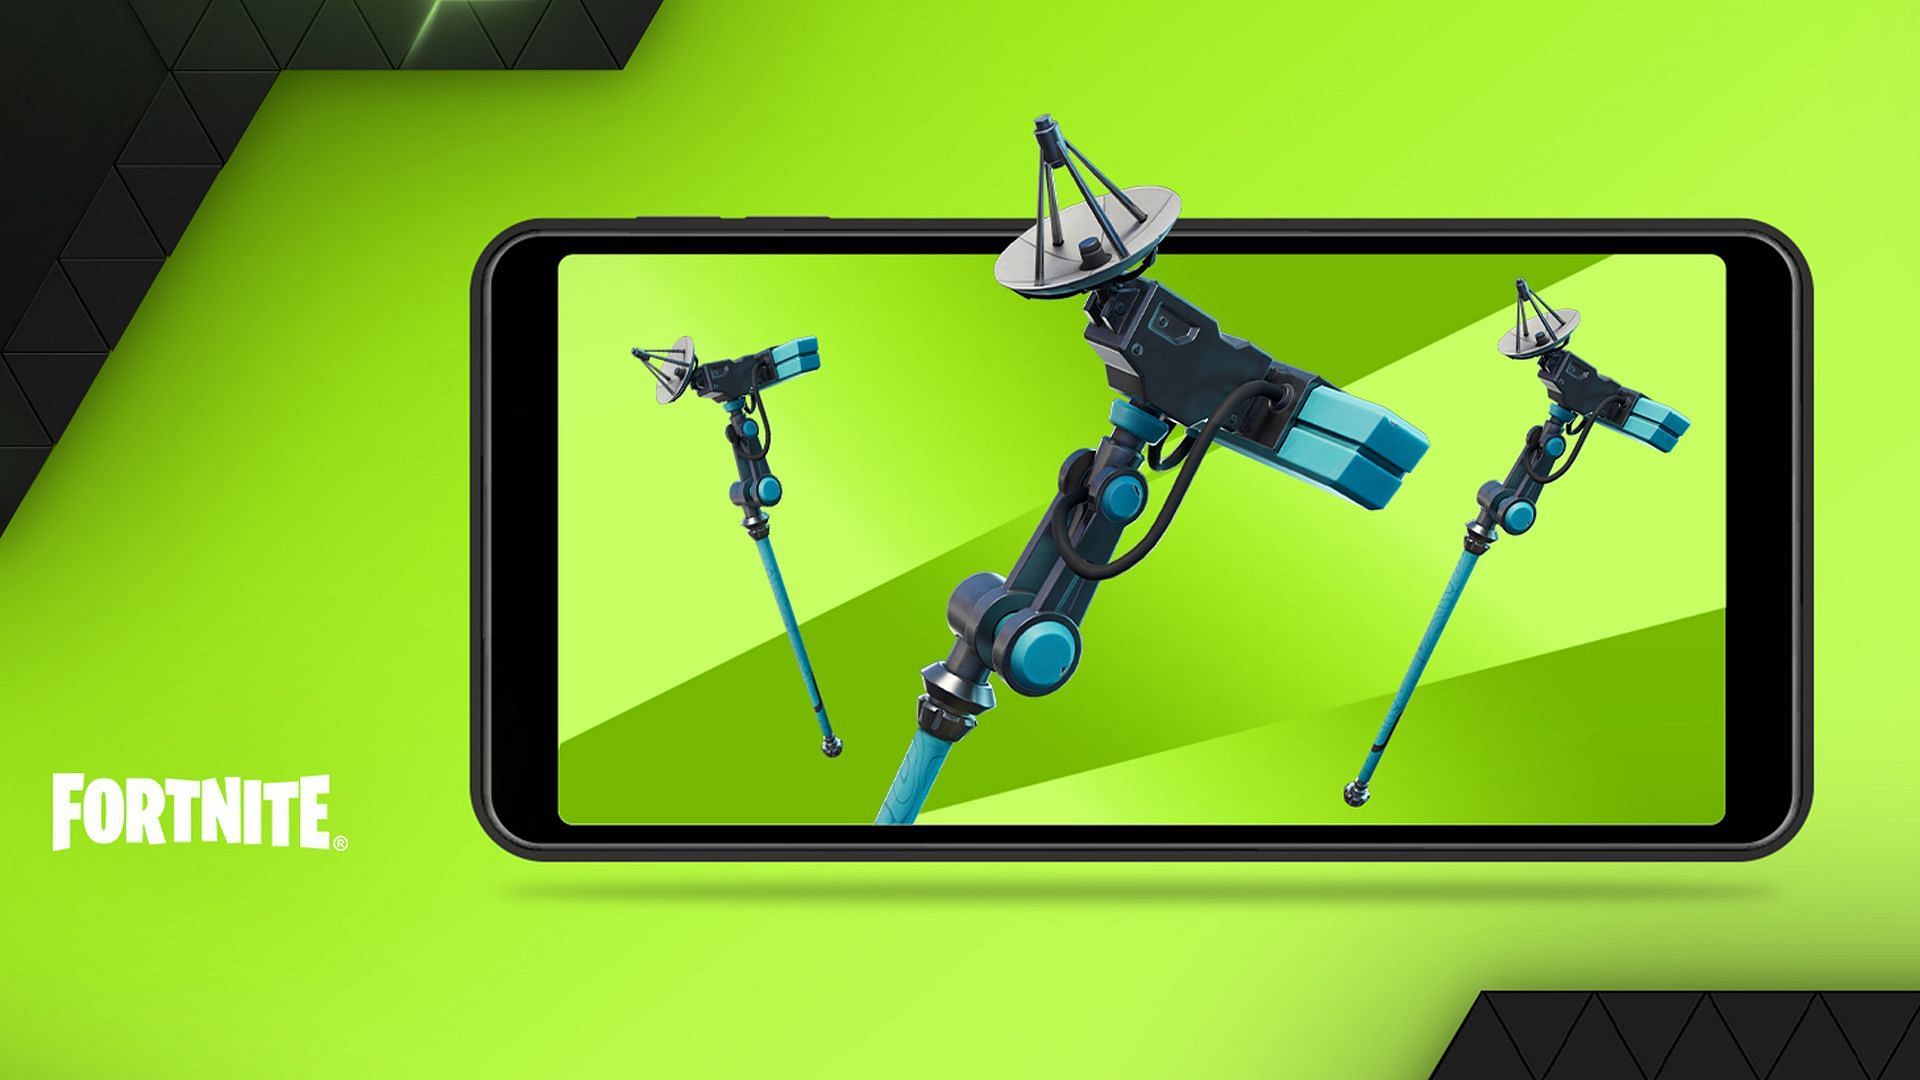 Dish-stroyer Pickaxe is available for free to Fortnite Battle Royale players (Image via Nvidia)